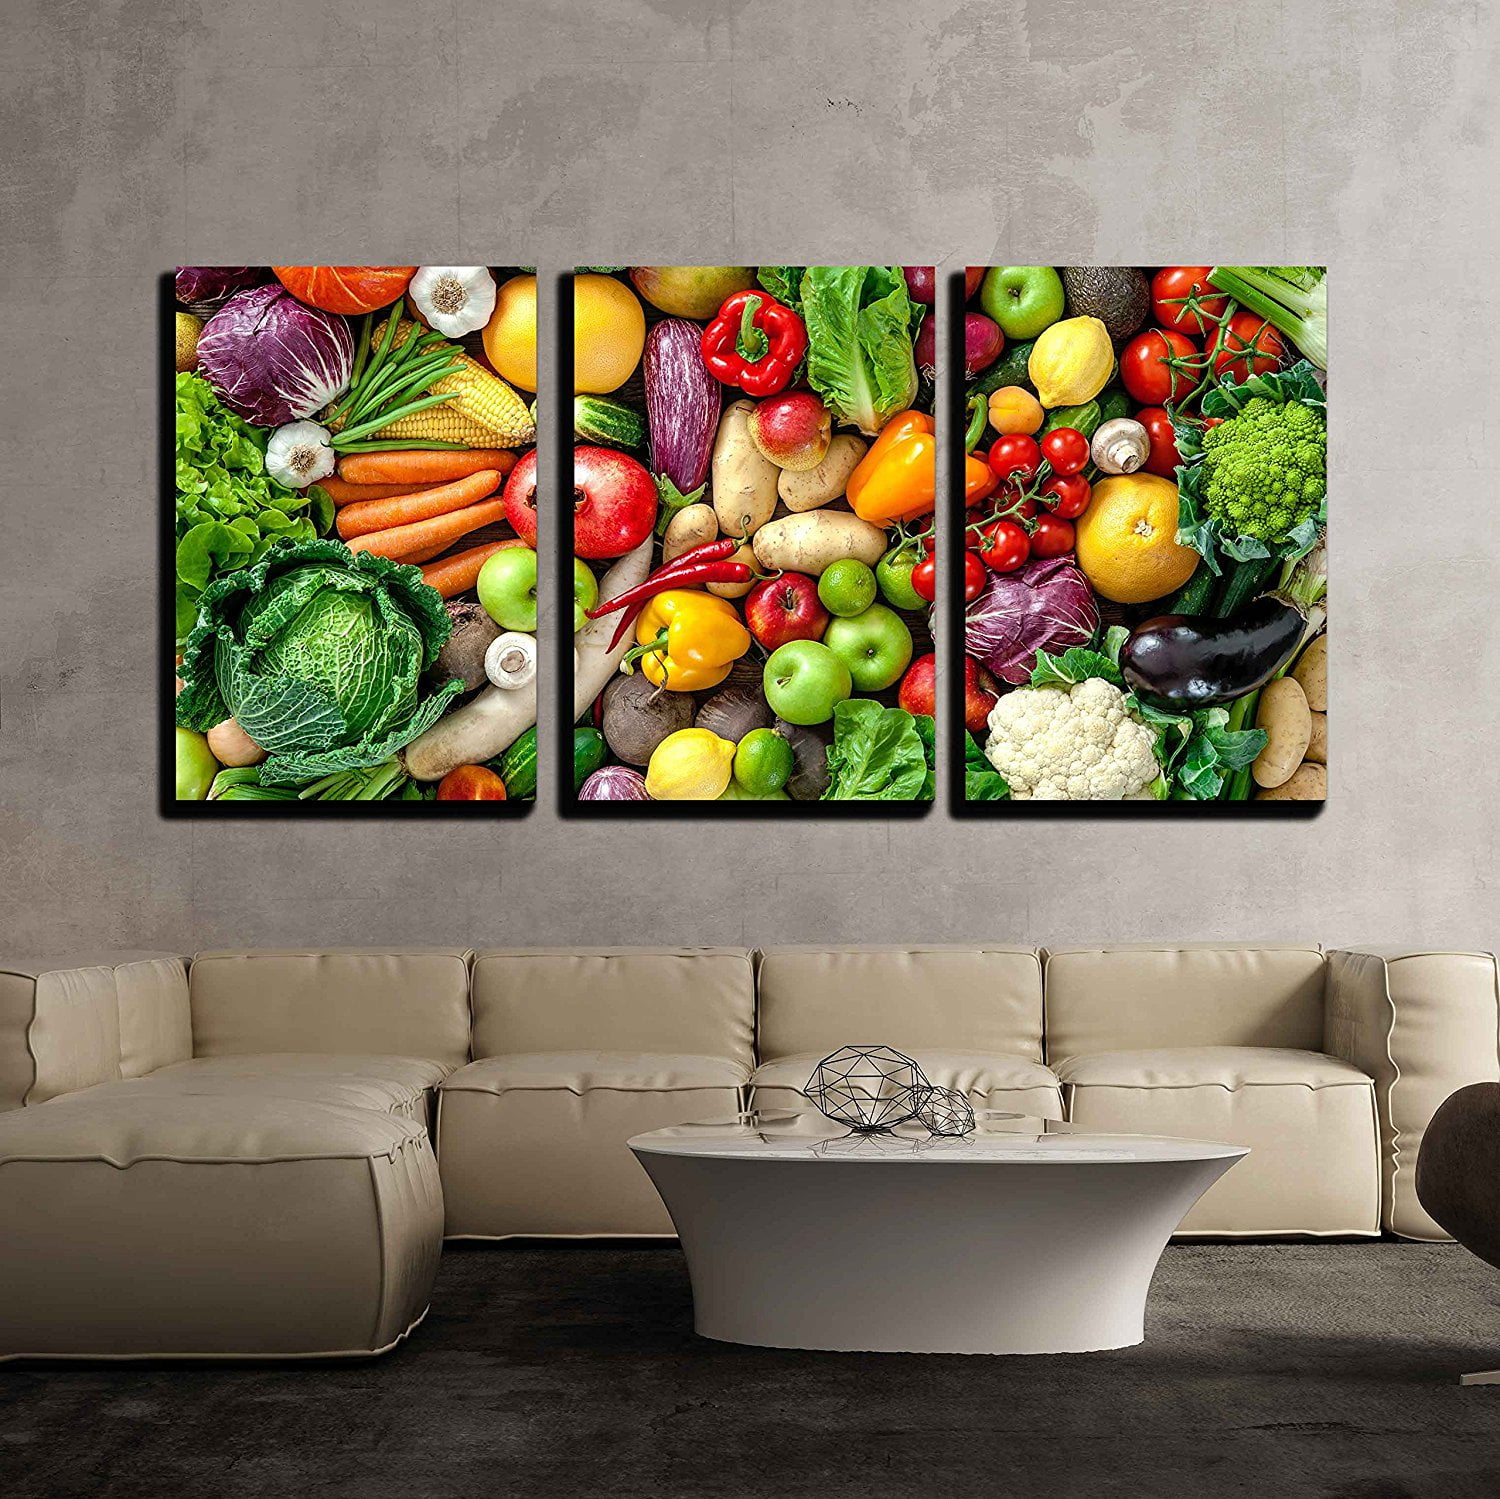 Wall26 3 Piece Canvas Wall Art - Assortment of Fresh Fruits and